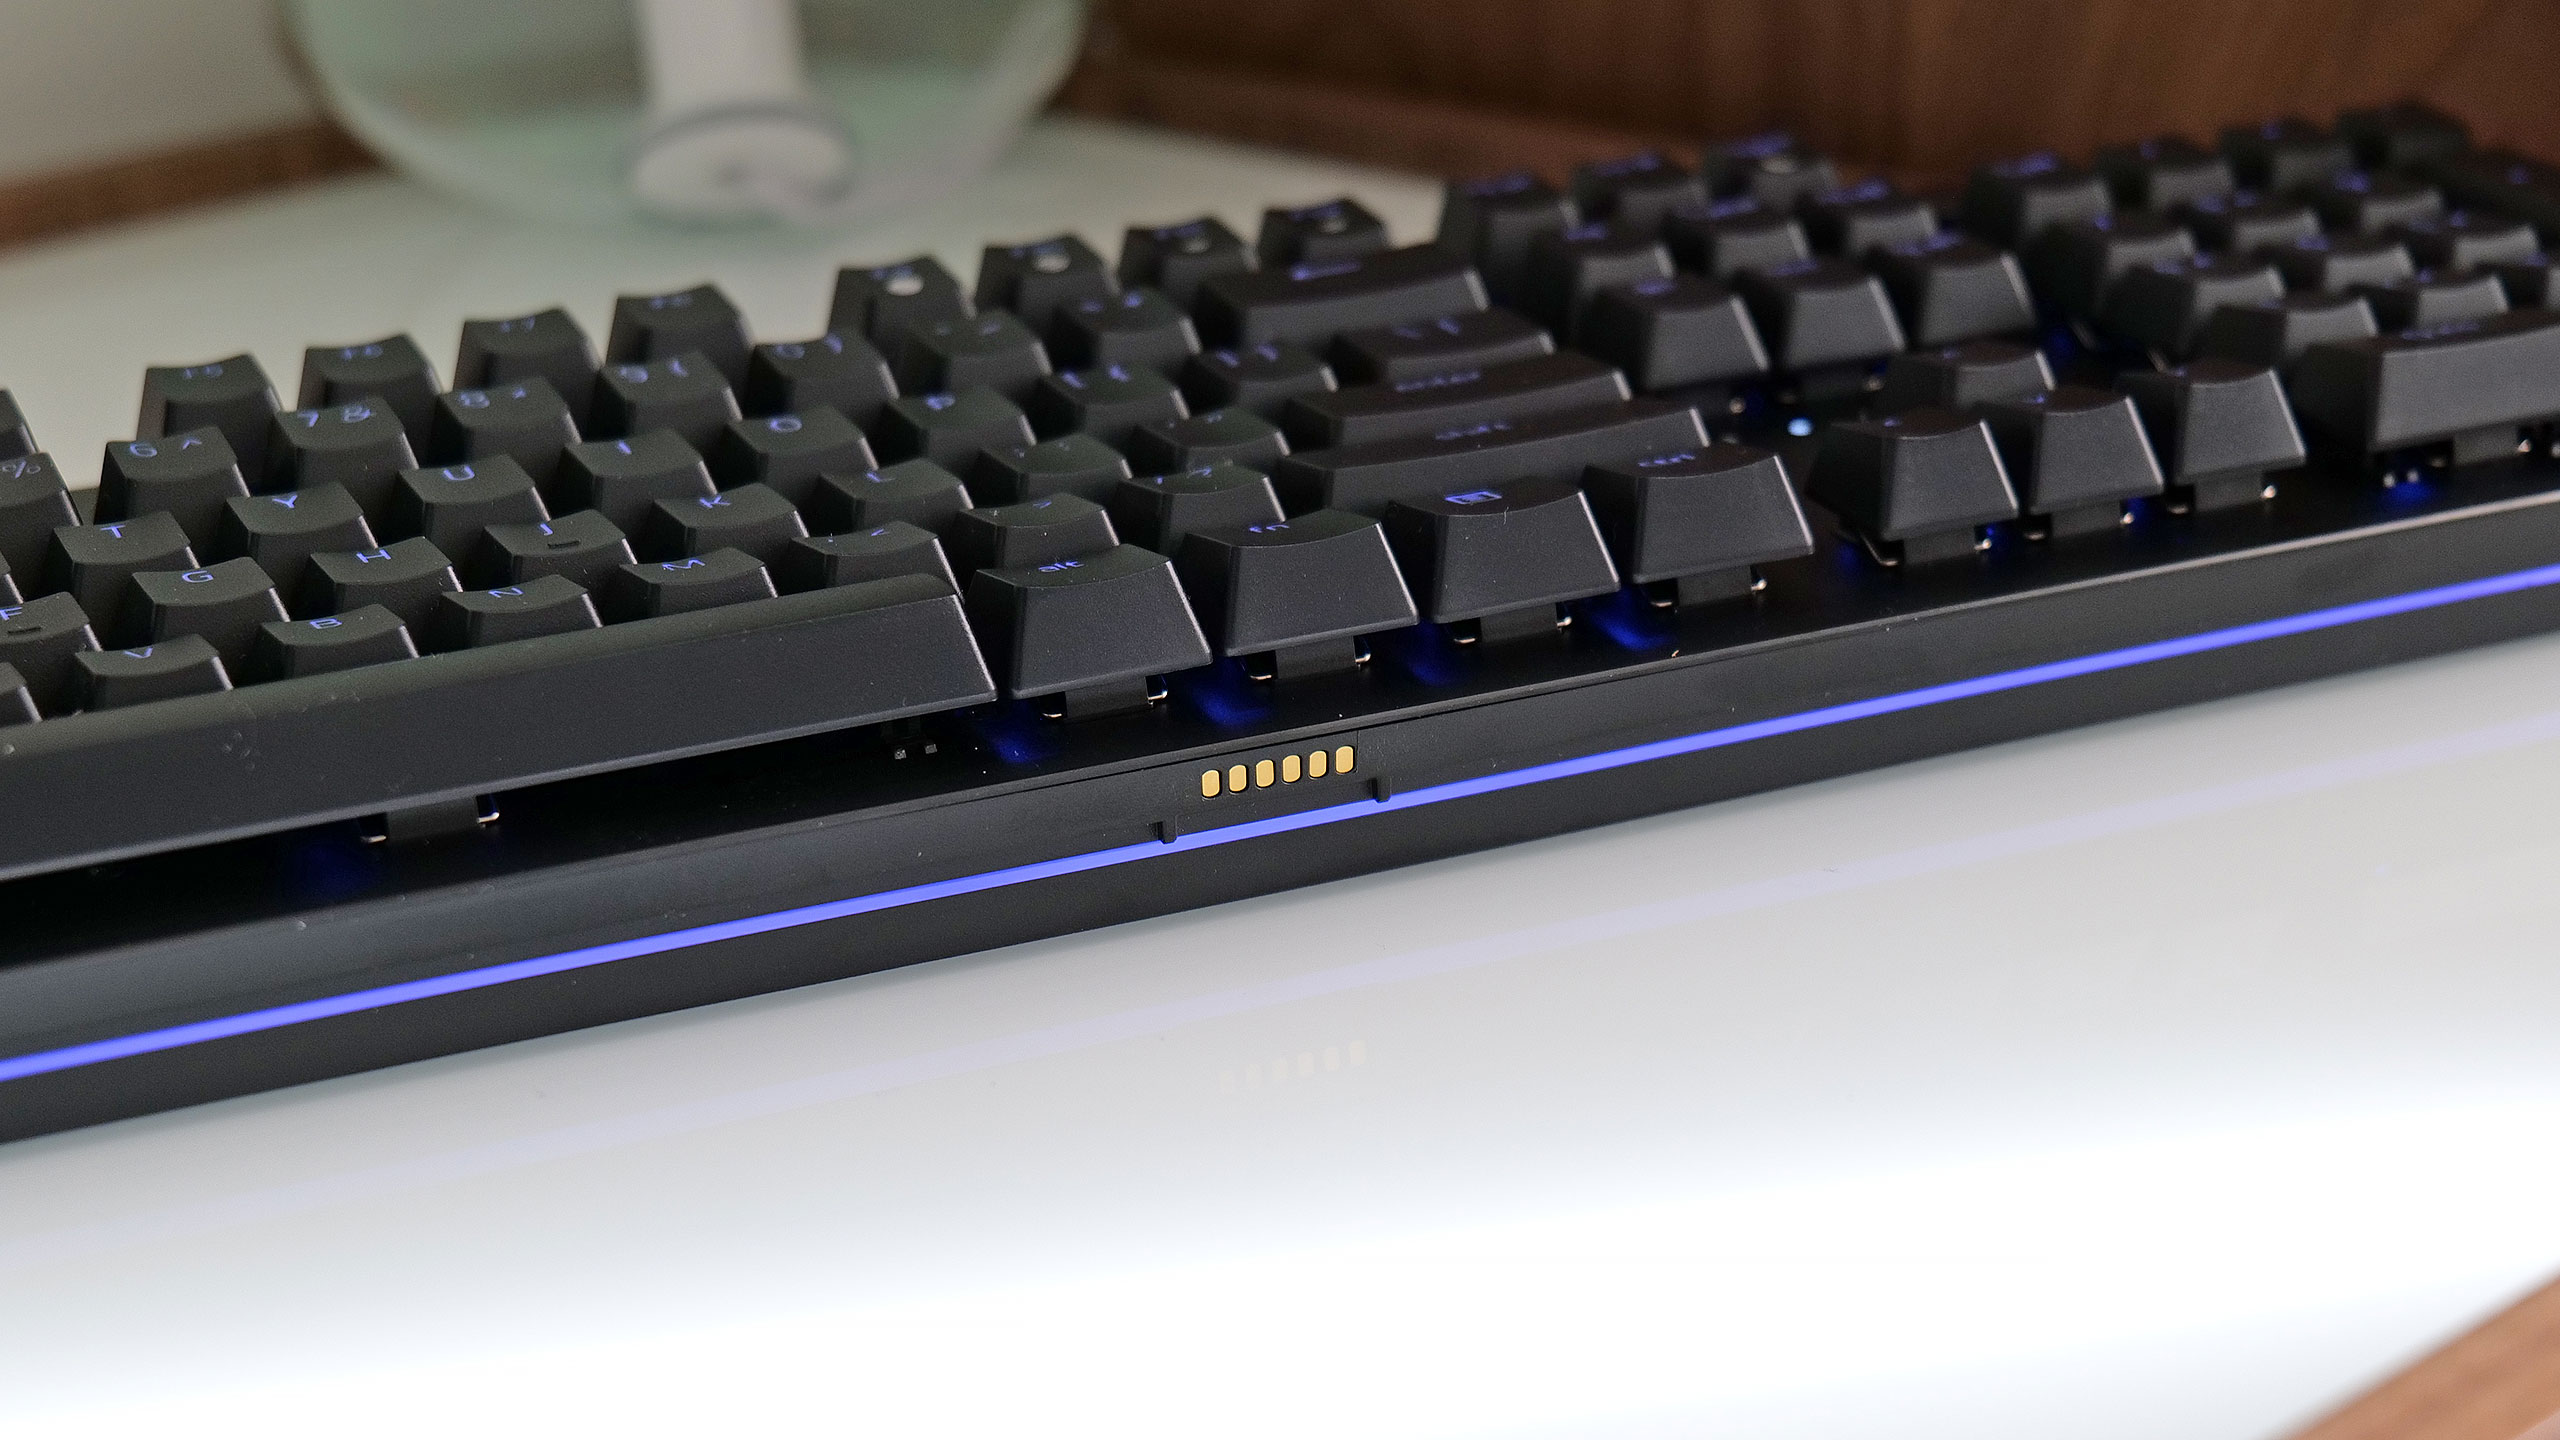 For those who love some nice RGB, there's a bonus strip of lighting around the base of the keyboard.  (Photo: Sam Rutherford)